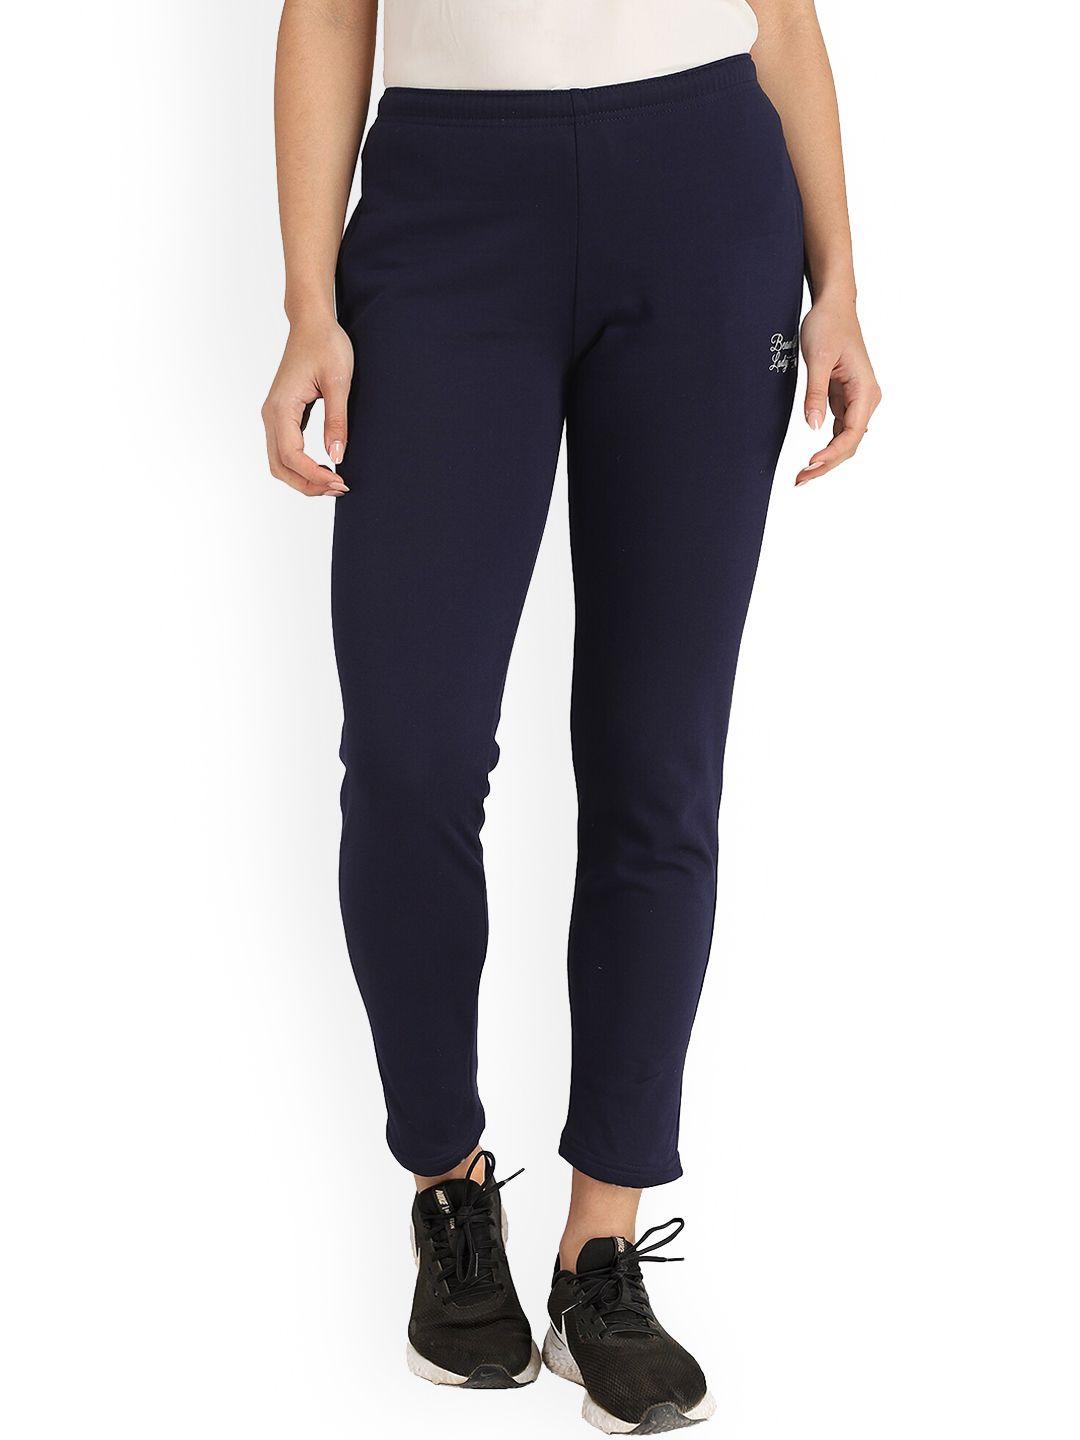 dyca women navy blue solid track pants